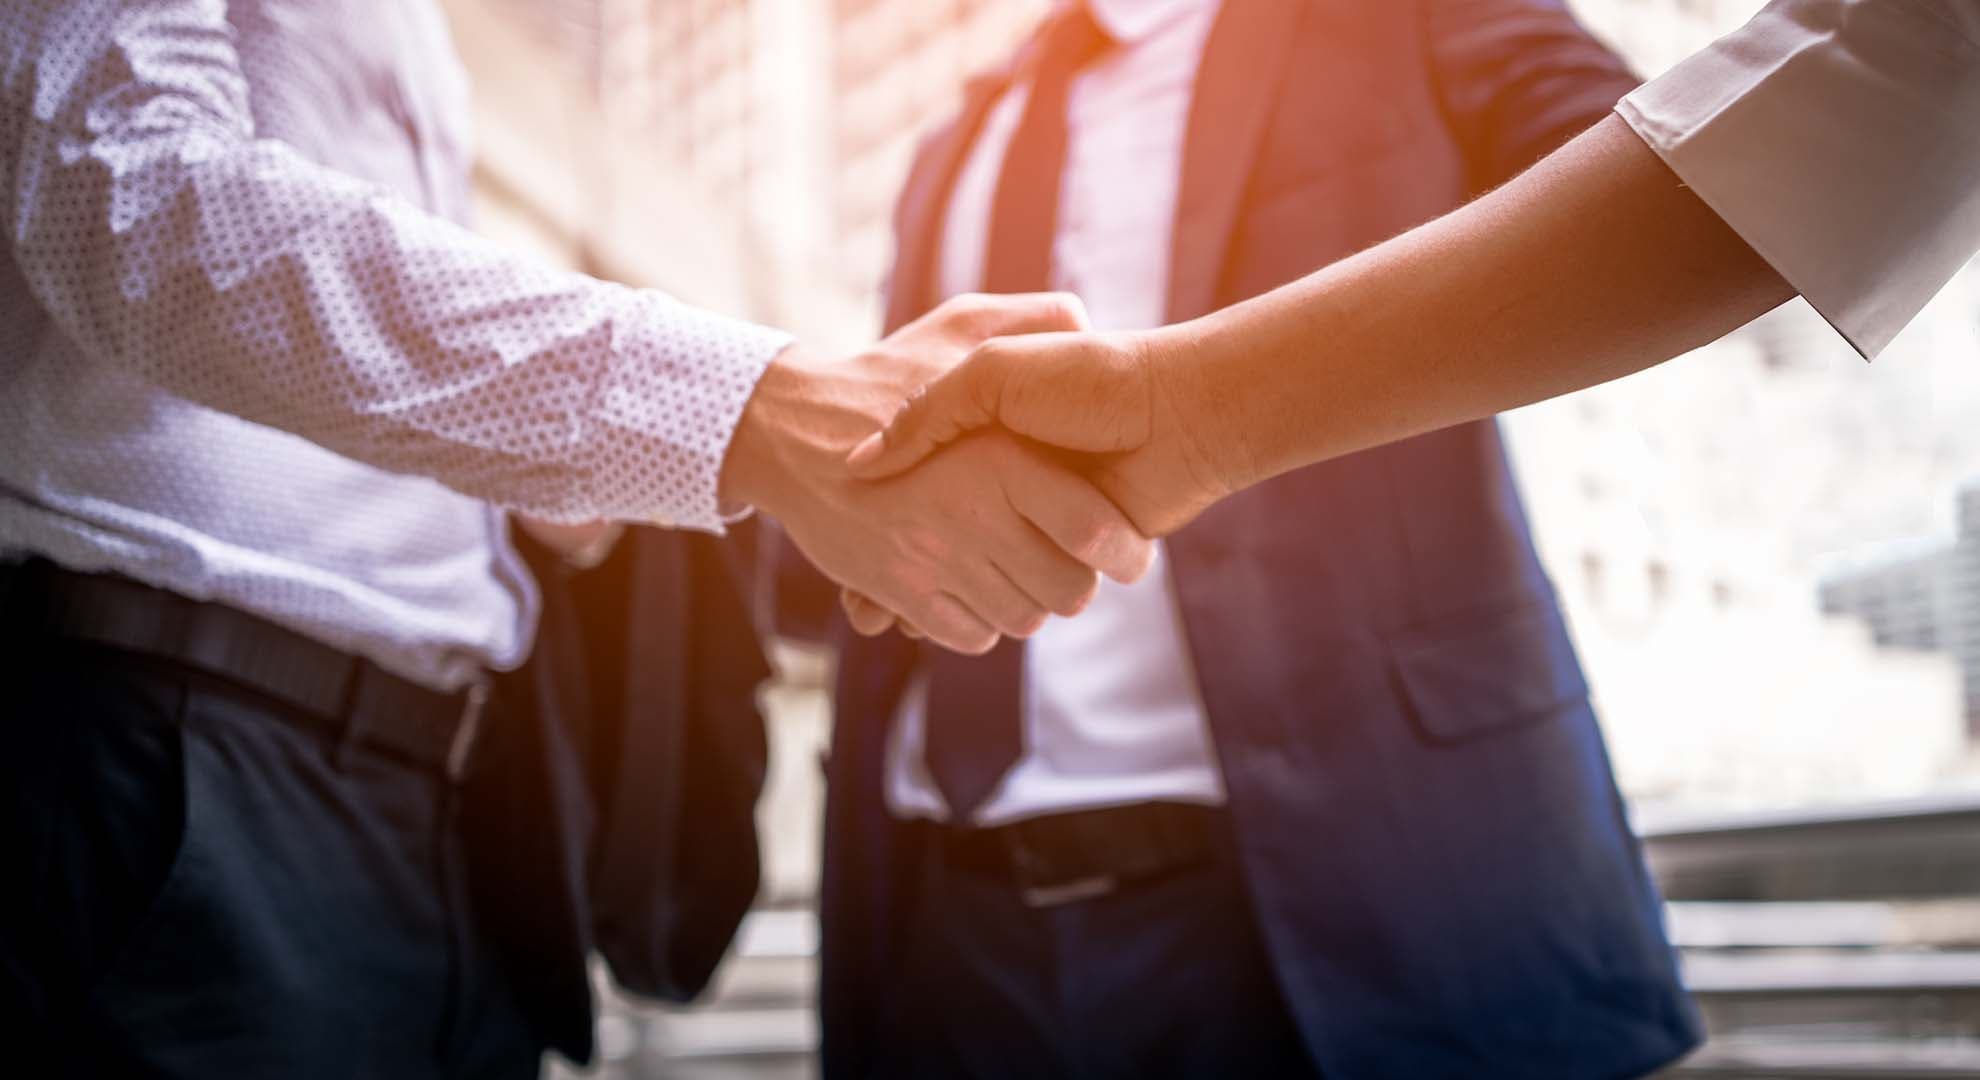 Two people shaking hands in front of a third person, in a business meeting